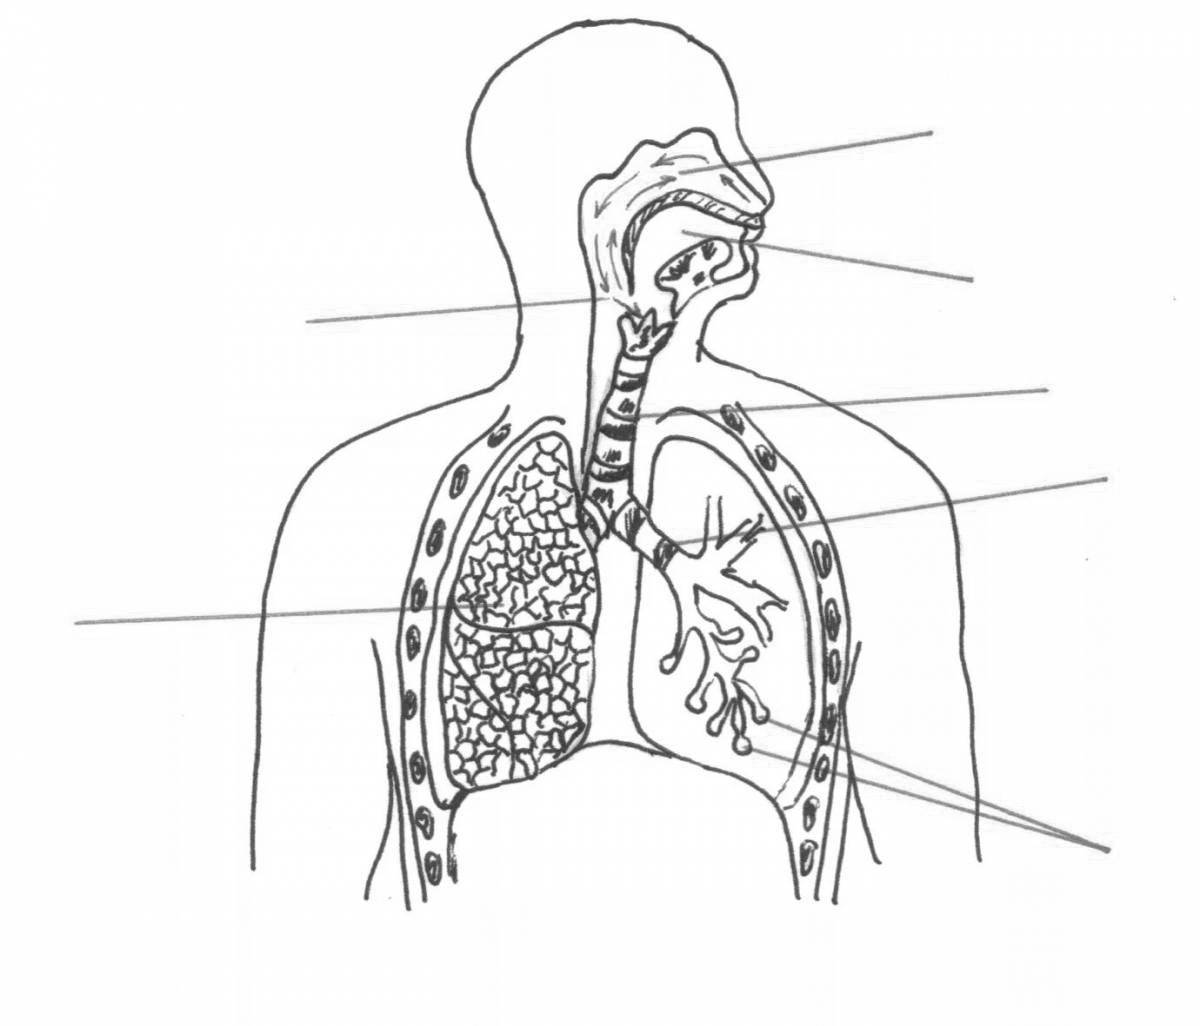 Coloring book bright respiratory system